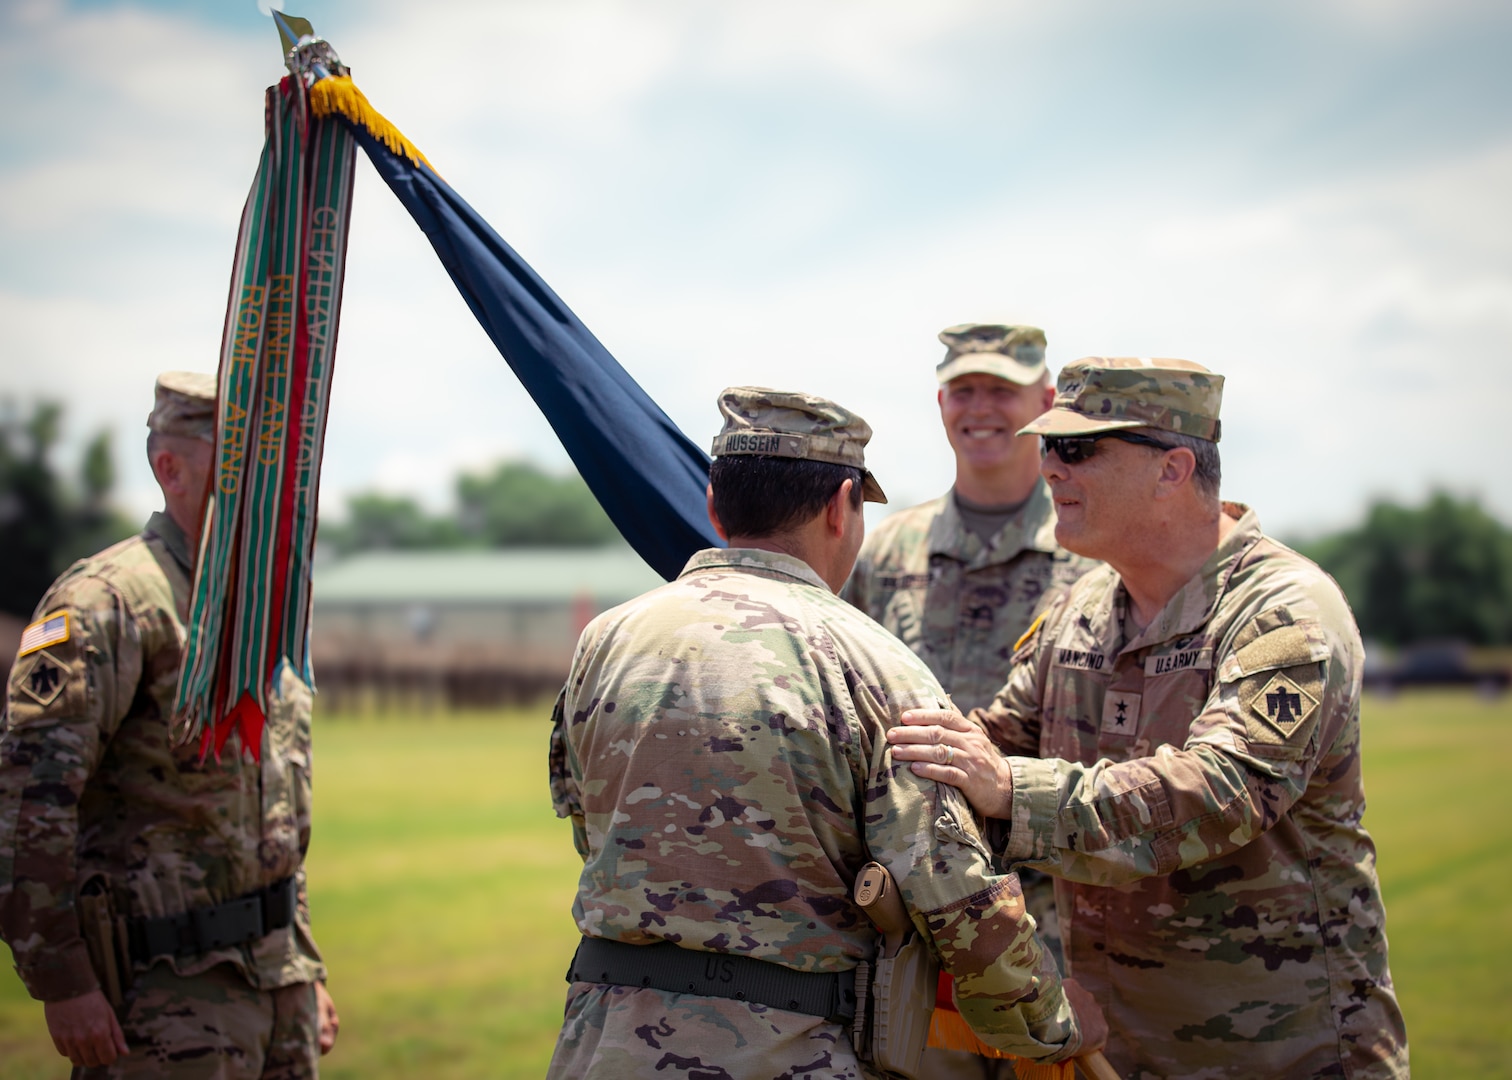 Maj. Gen. Thomas Mancino, adjutant general for Oklahoma, passes the unit colors to Col. Khalid Hussein, incoming commander of the 45th Infantry Brigade Combat Team, Oklahoma Army National Guard, during a change of command ceremony held at Camp Gruber Training Center near Braggs, Oklahoma, June 11, 2024. Command of the 45th IBCT passed from Col. Andrew Ballenger, who led the unit since 2022 through numerous deployments and training exercises. (Oklahoma National Guard photo by Cpl. Danielle Rayon)